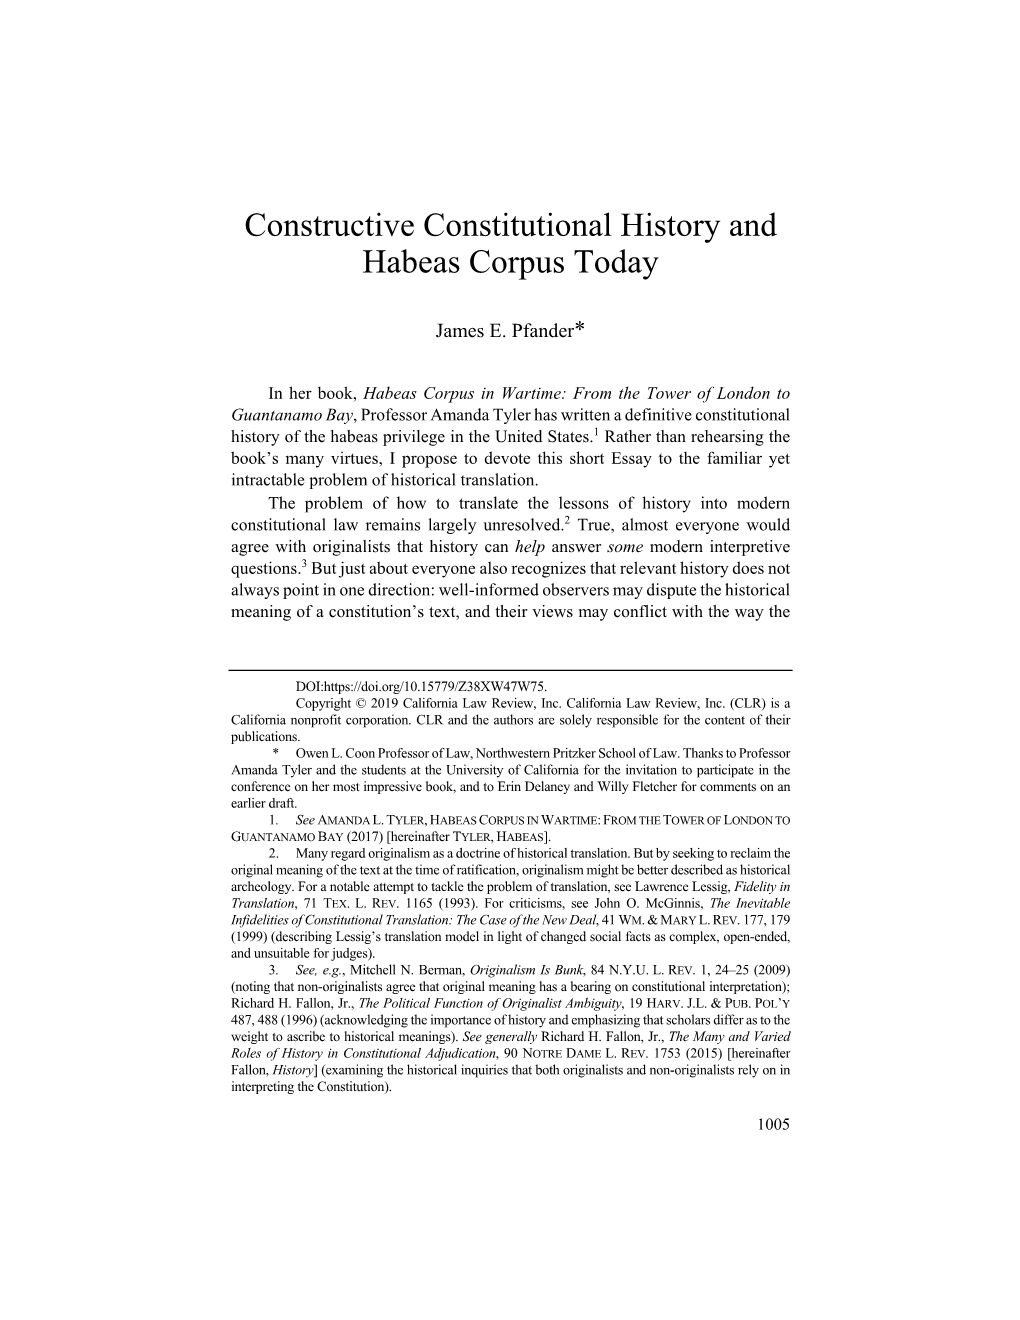 Constructive Constitutional History and Habeas Corpus Today